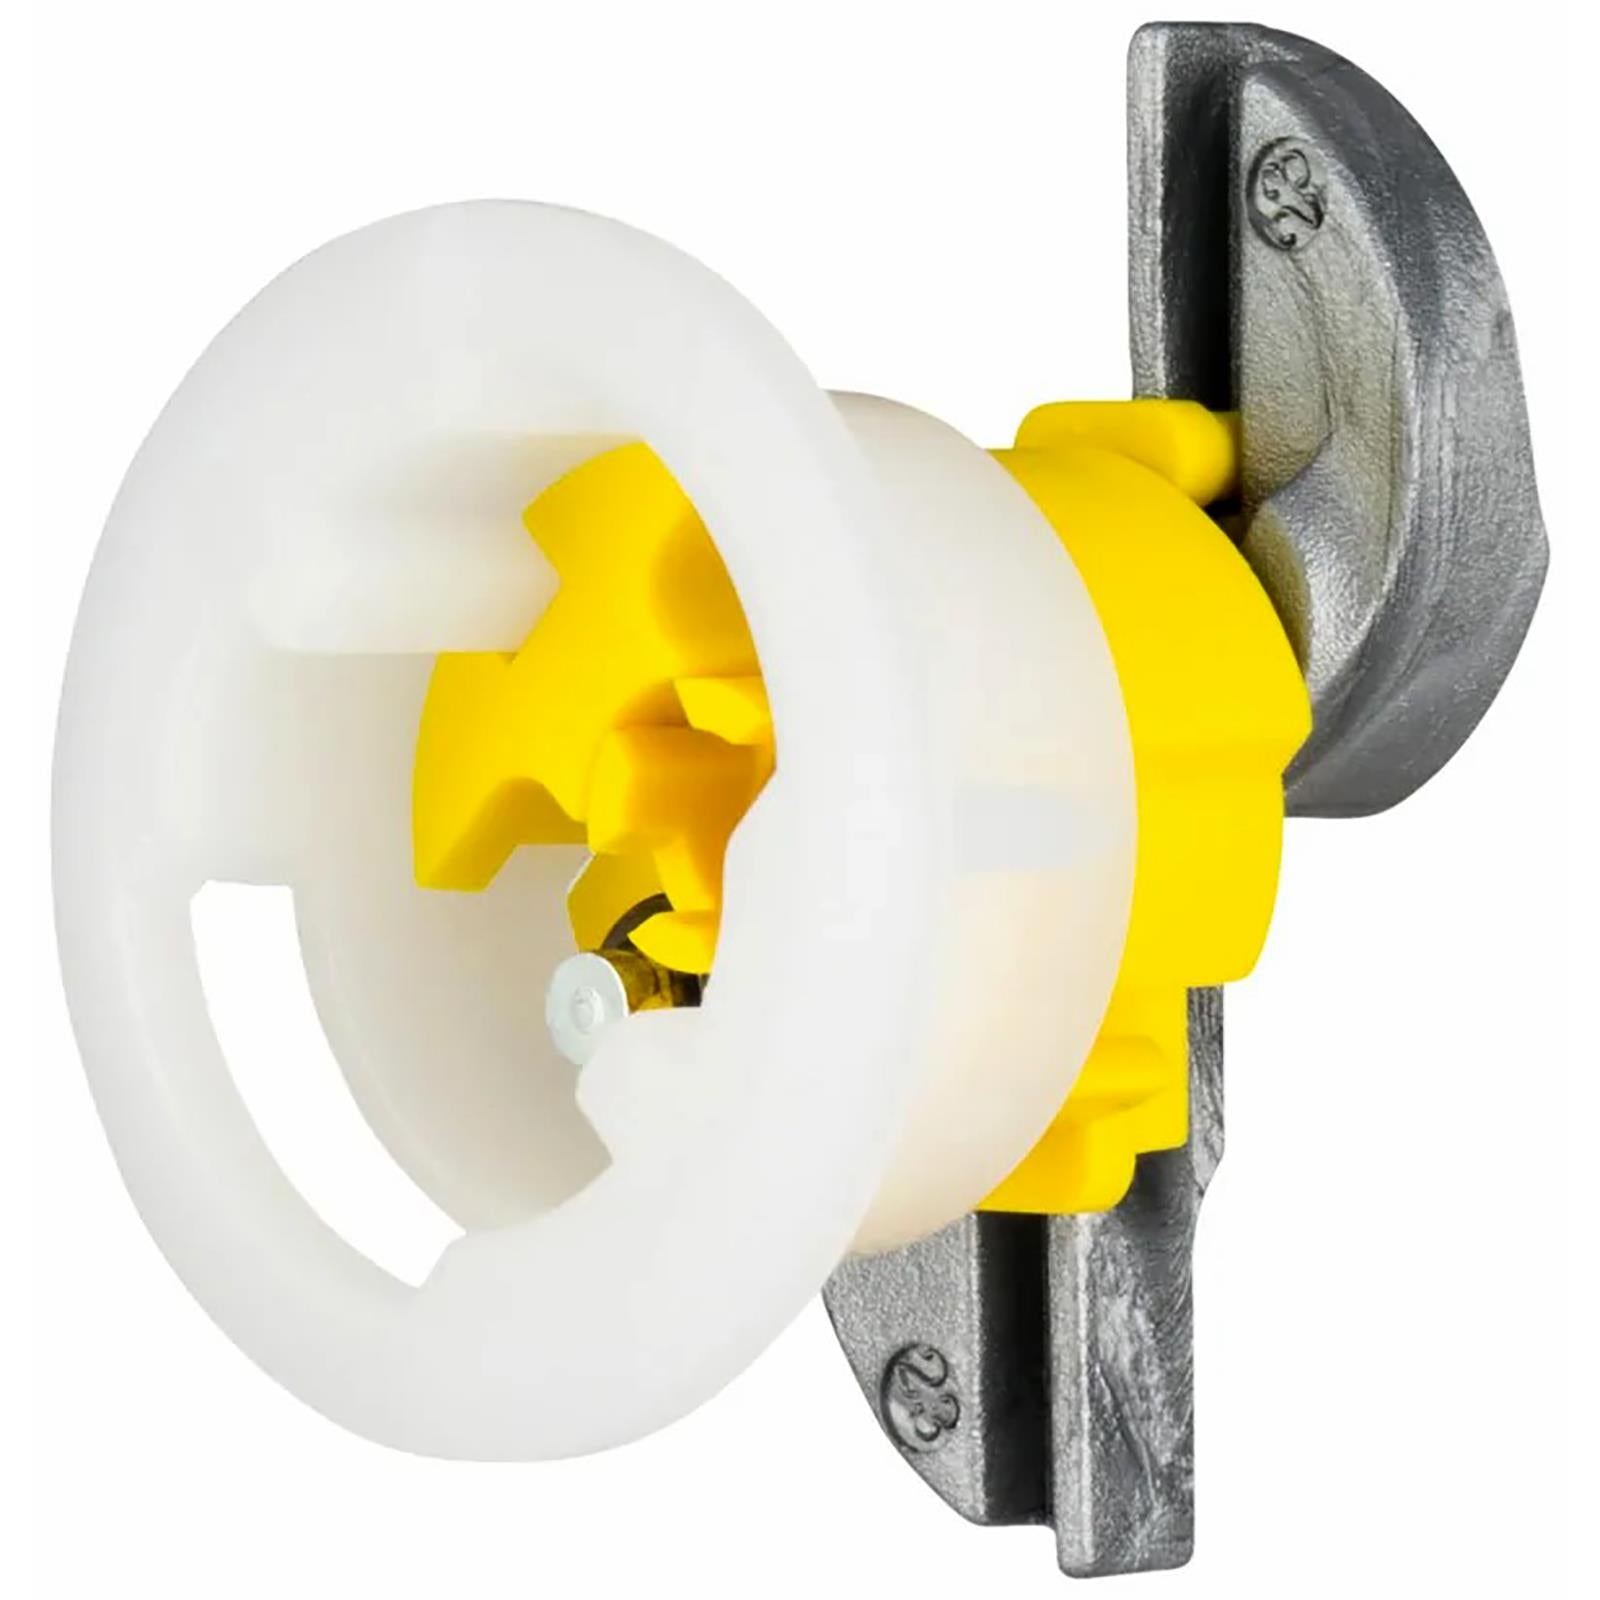 GripIt Yellow Plasterboard Fixings 15mm 8 Pack